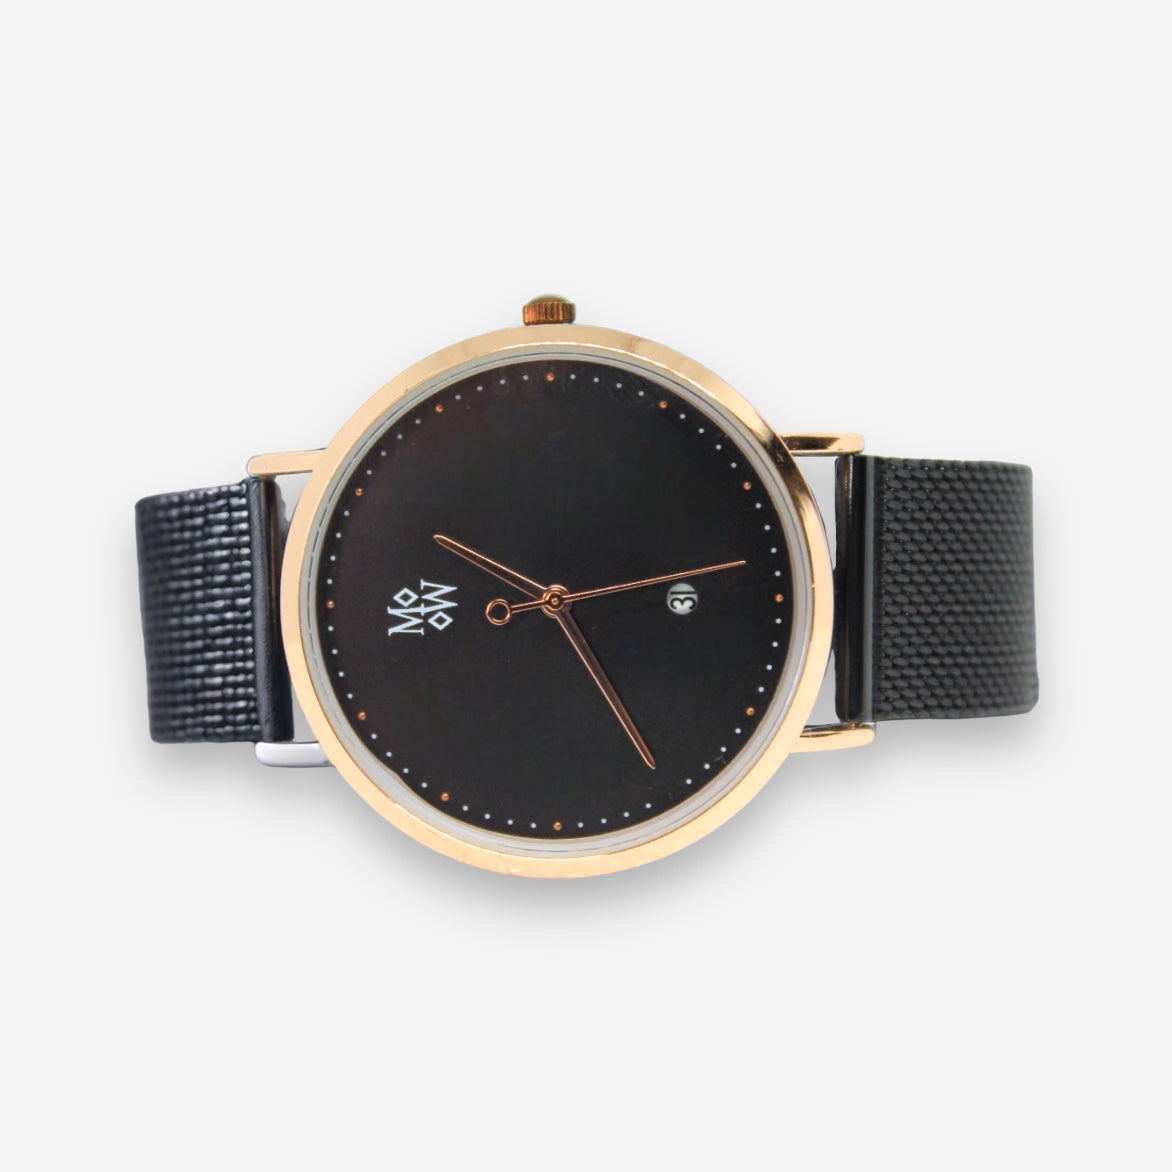 Forte Rose Gold & Black - The Mobilio Watch Company